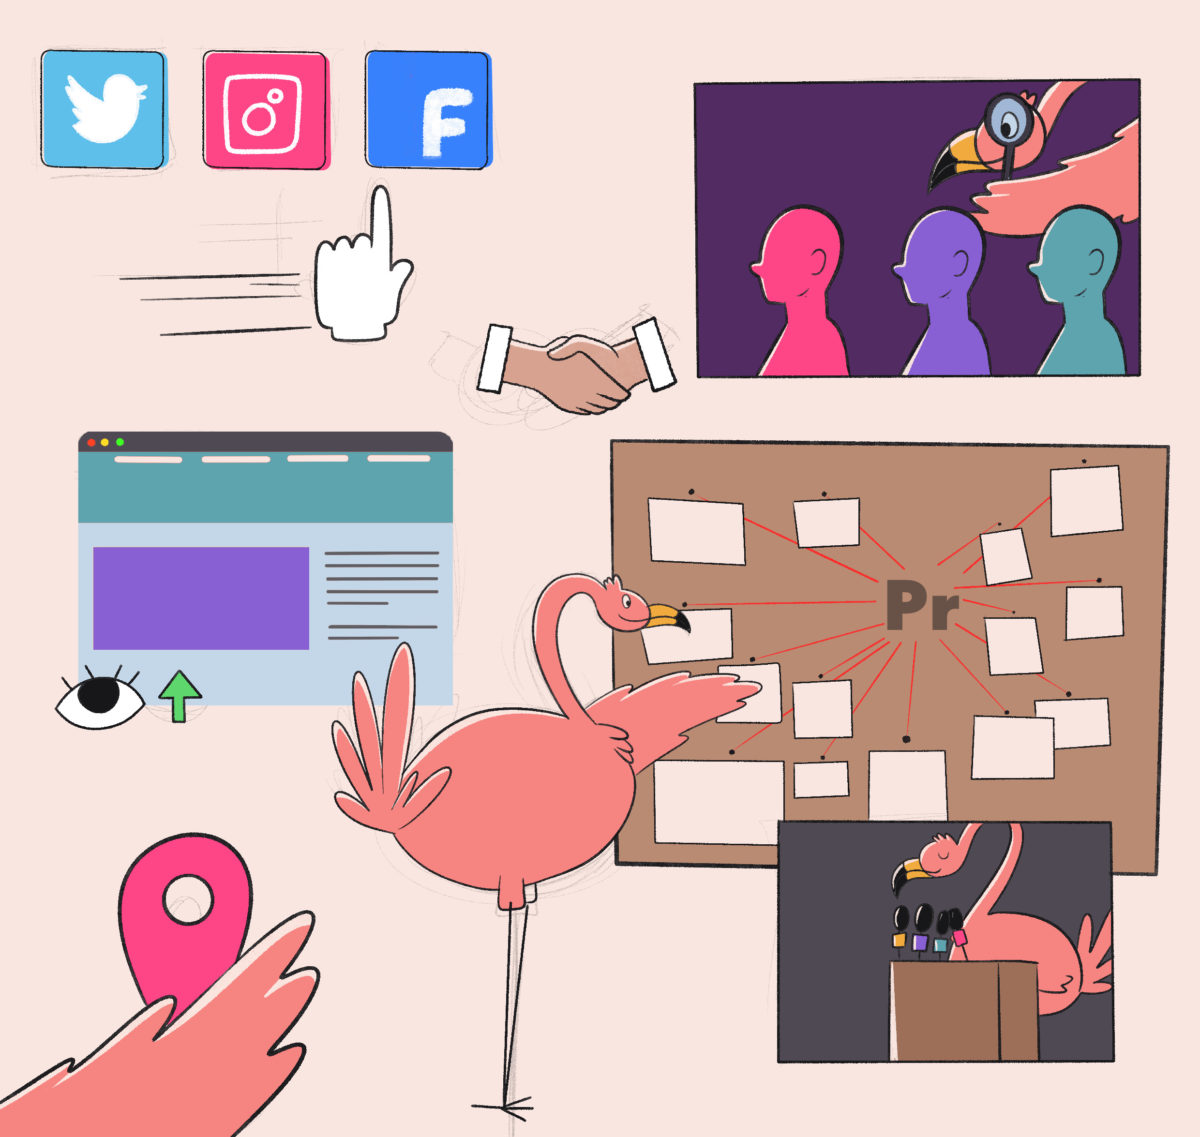 Illustration of social media icons, a web browser, collaborative work symbols, a flamingo, and a presentation board, representing digital and creative work concepts.